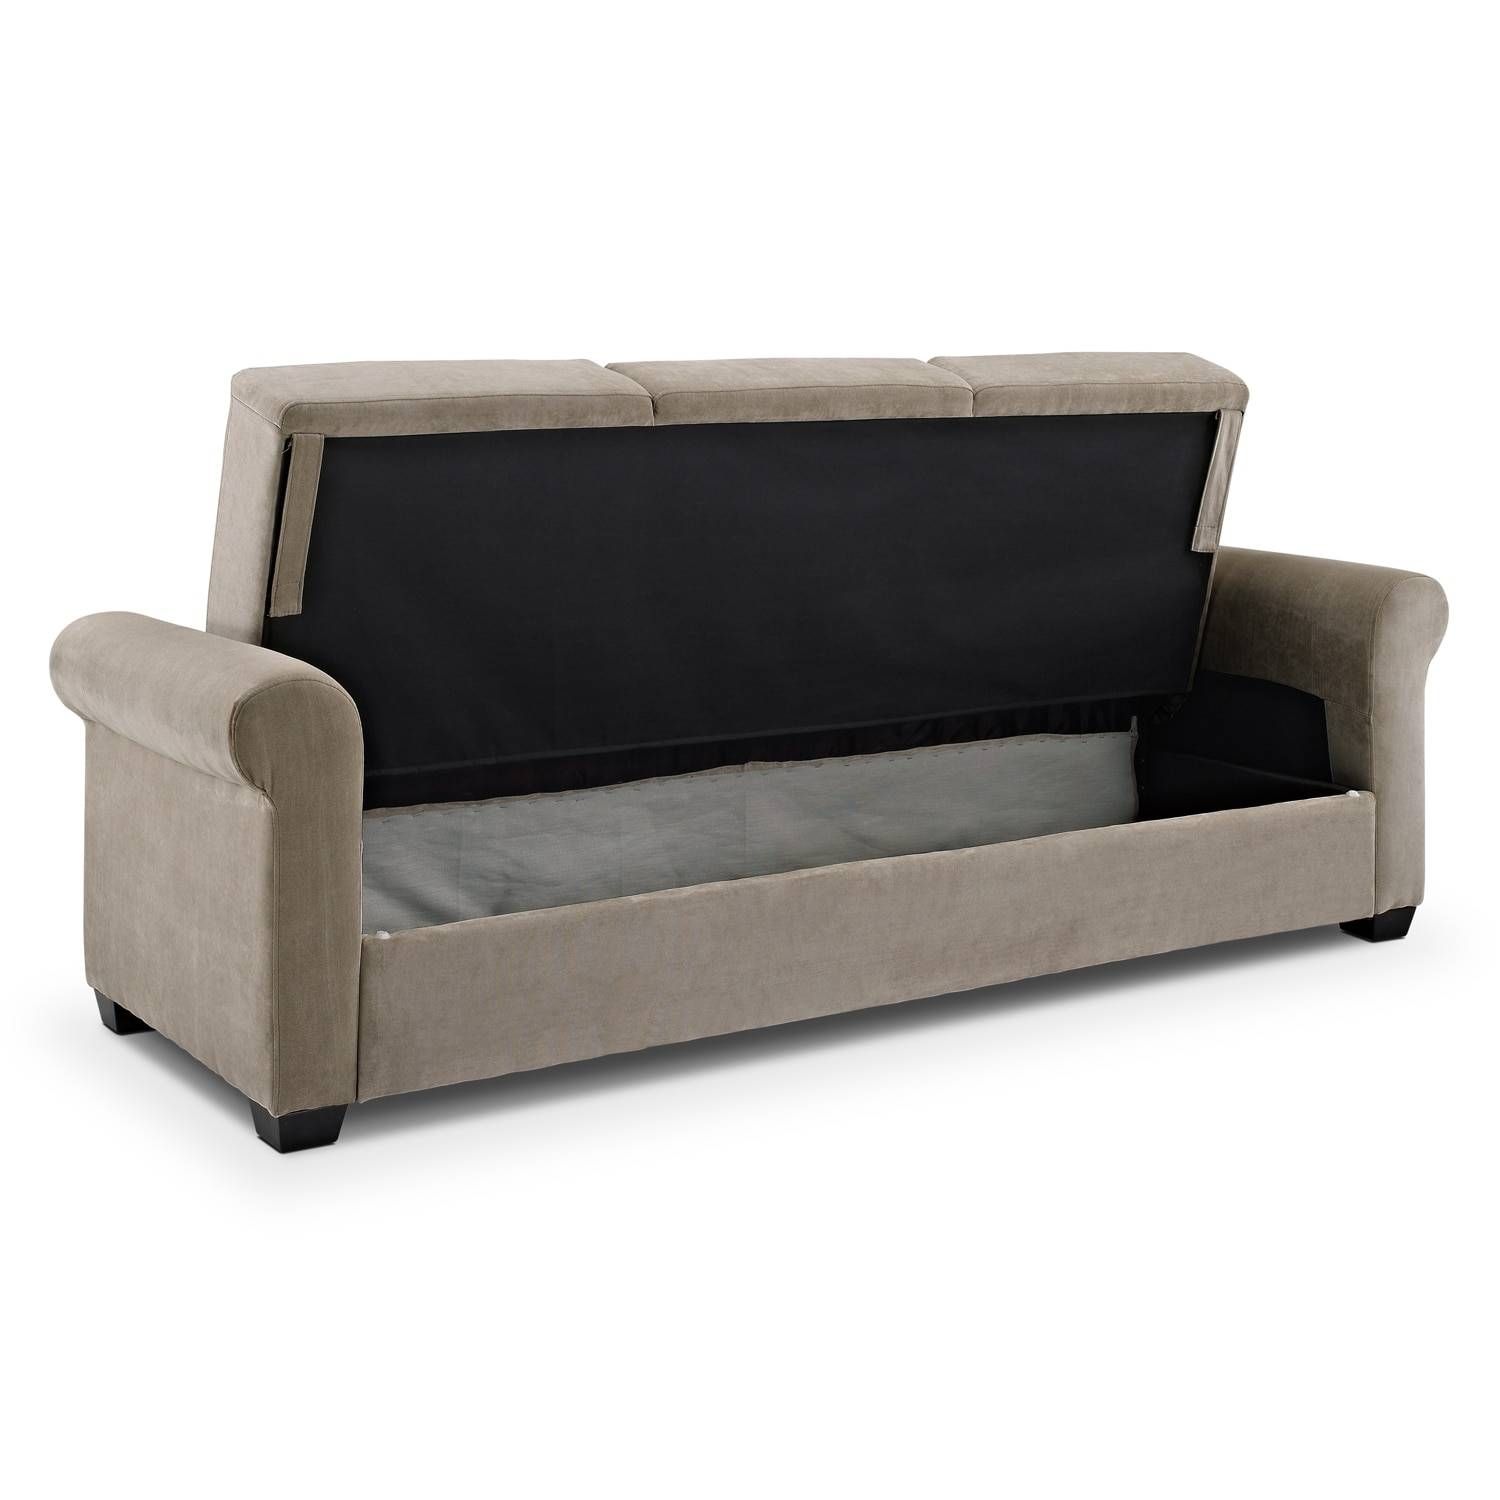 Thomas Futon Sofa Bed With Storage – Light Brown | Value City Intended For Sofa Beds With Storages (Photo 6 of 30)